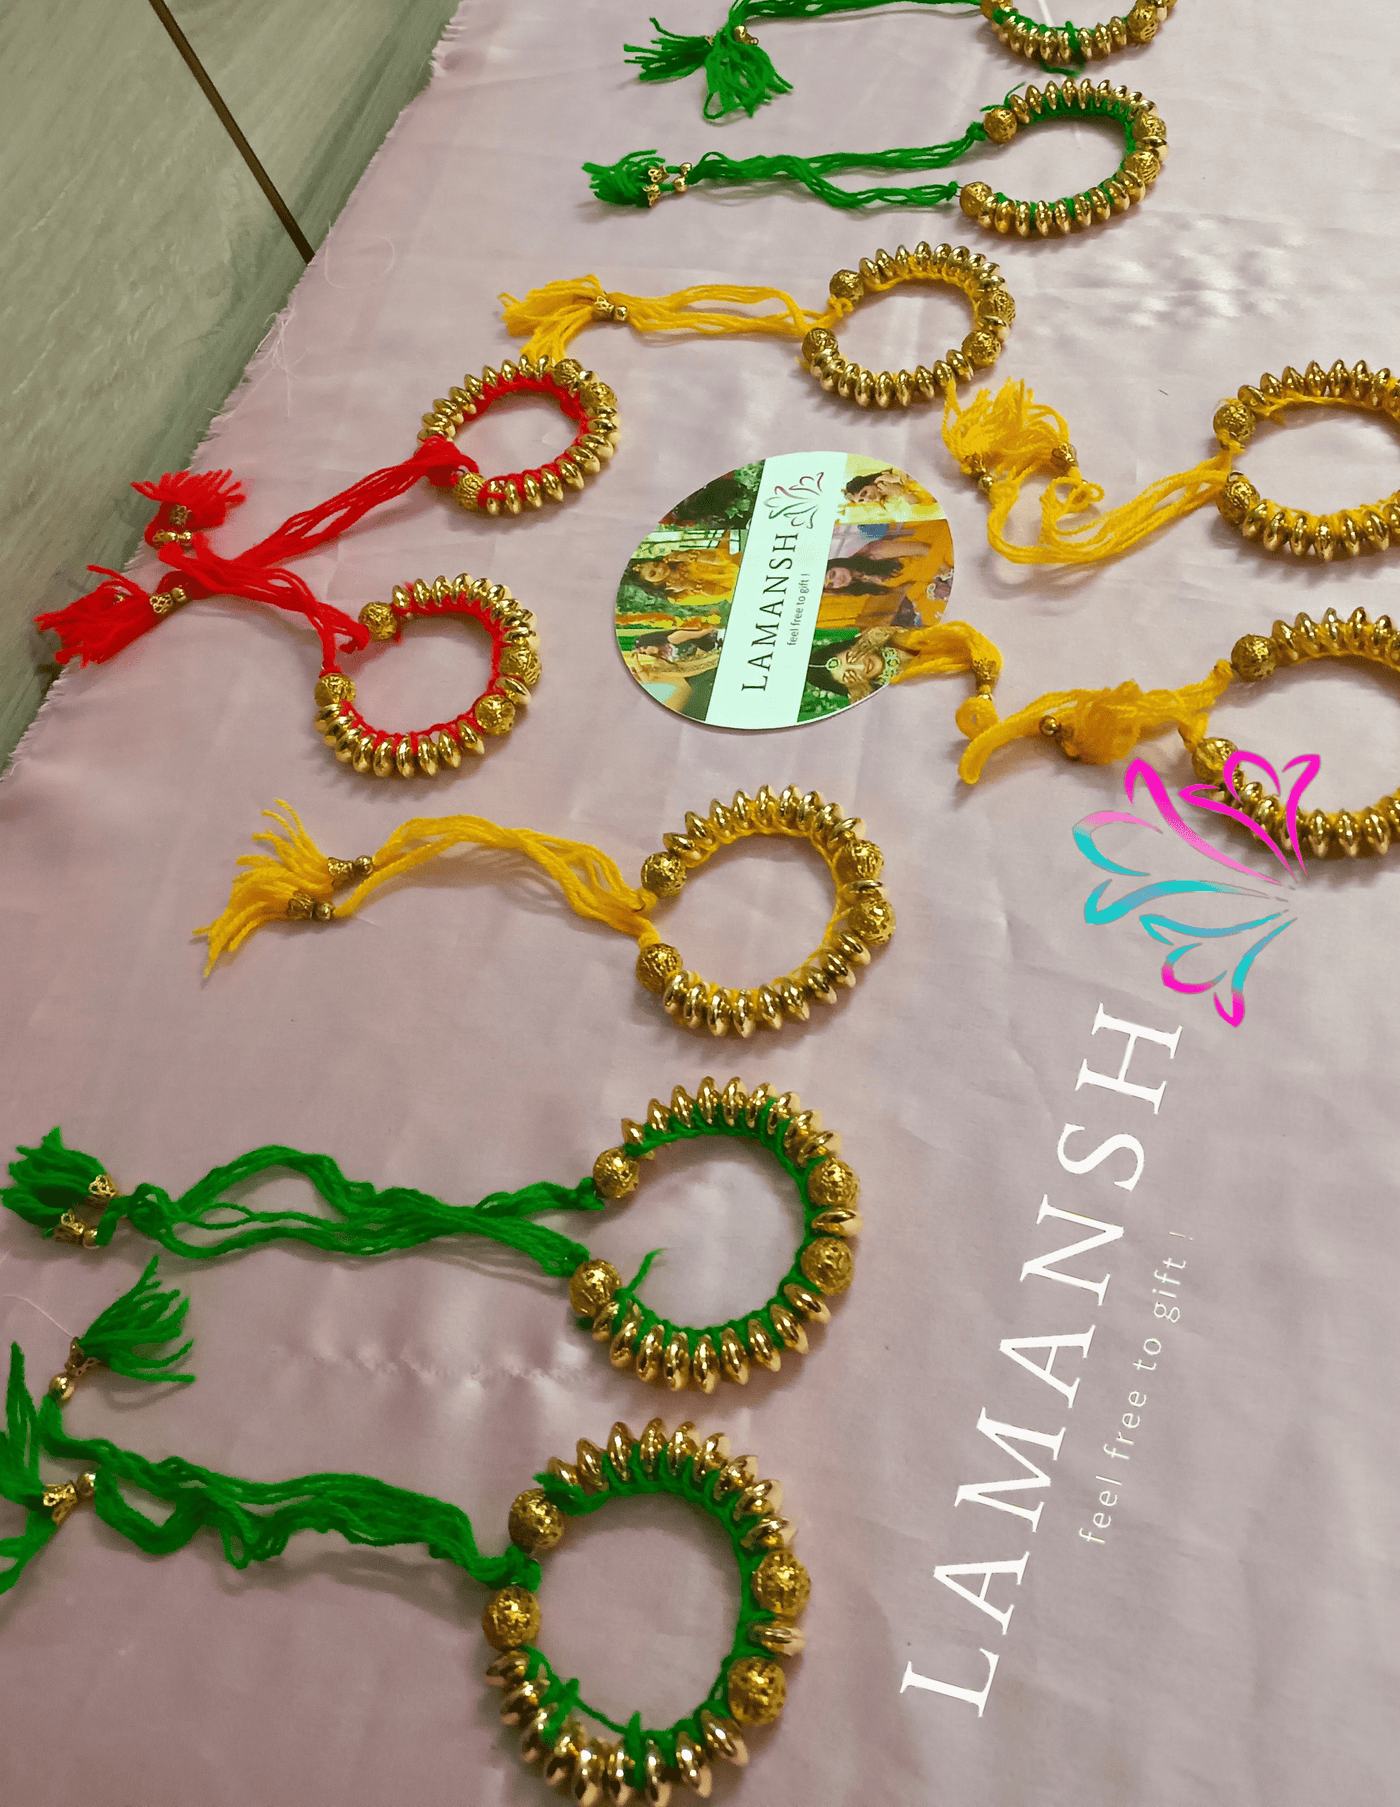 New Mehendi Favours That Will Make Your Friends Jump With Joy!